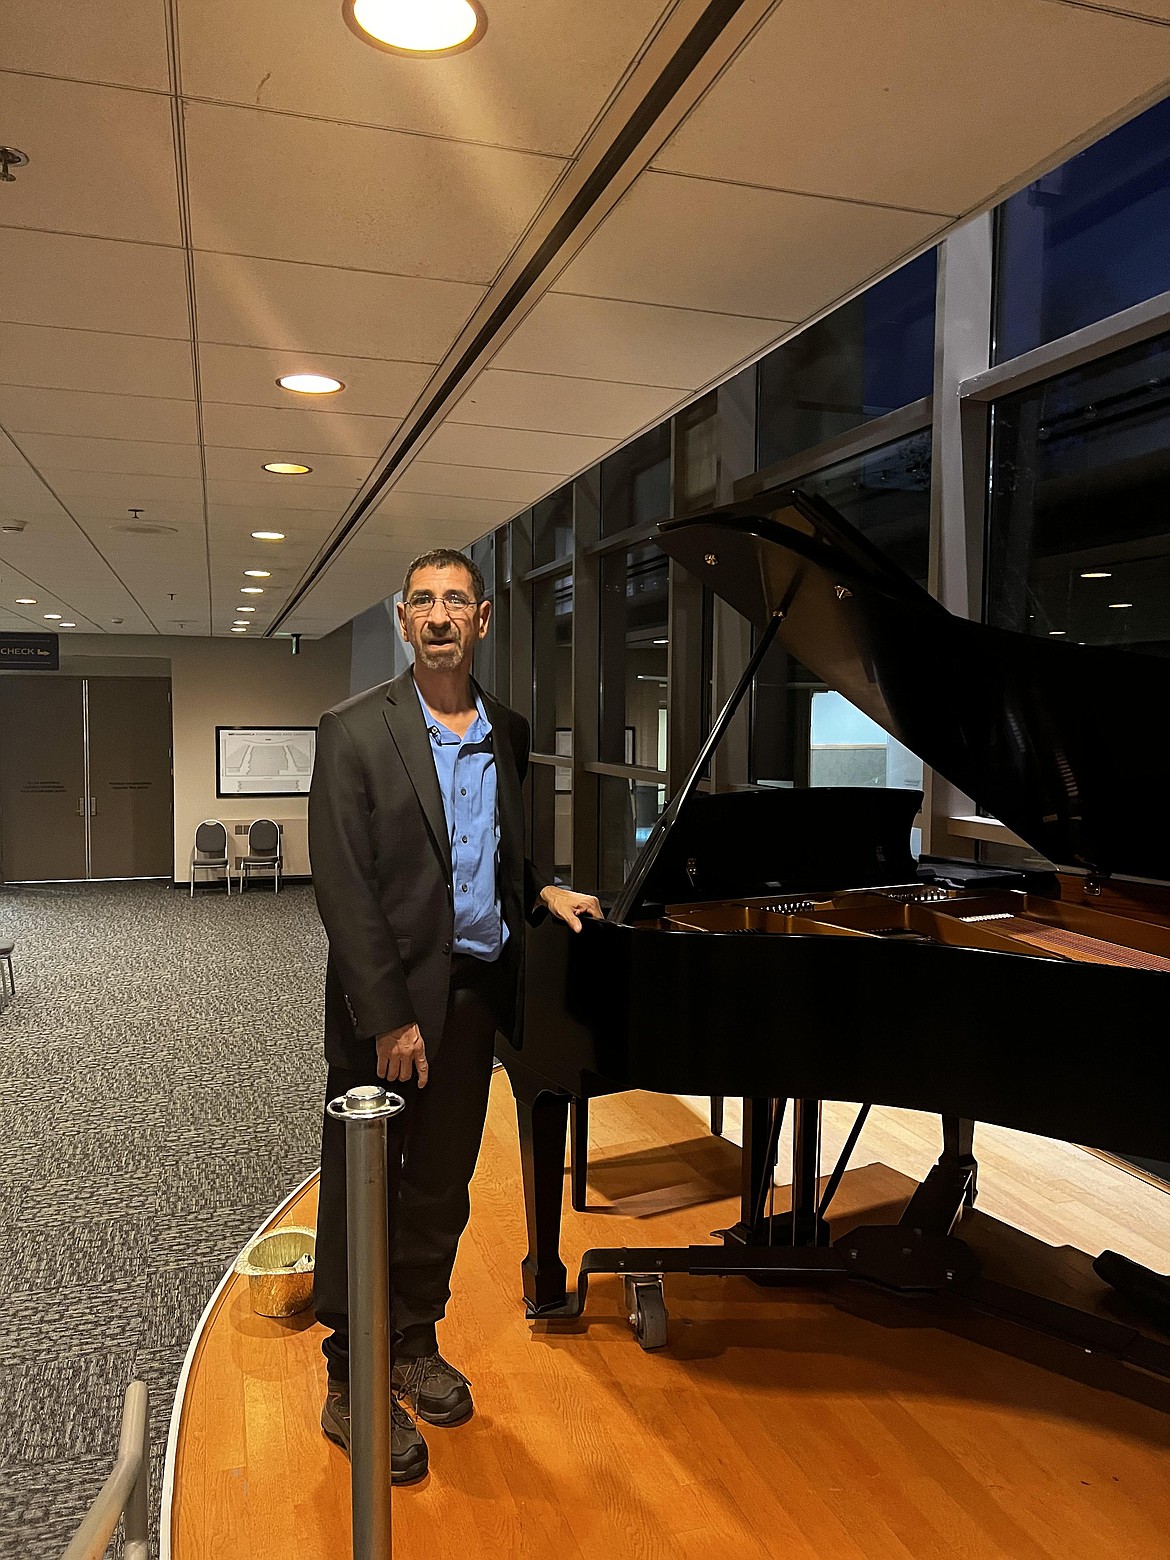 Alvarado poses in front of the baby grand piano at the Numerica Performing Arts Center in Wenatchee.